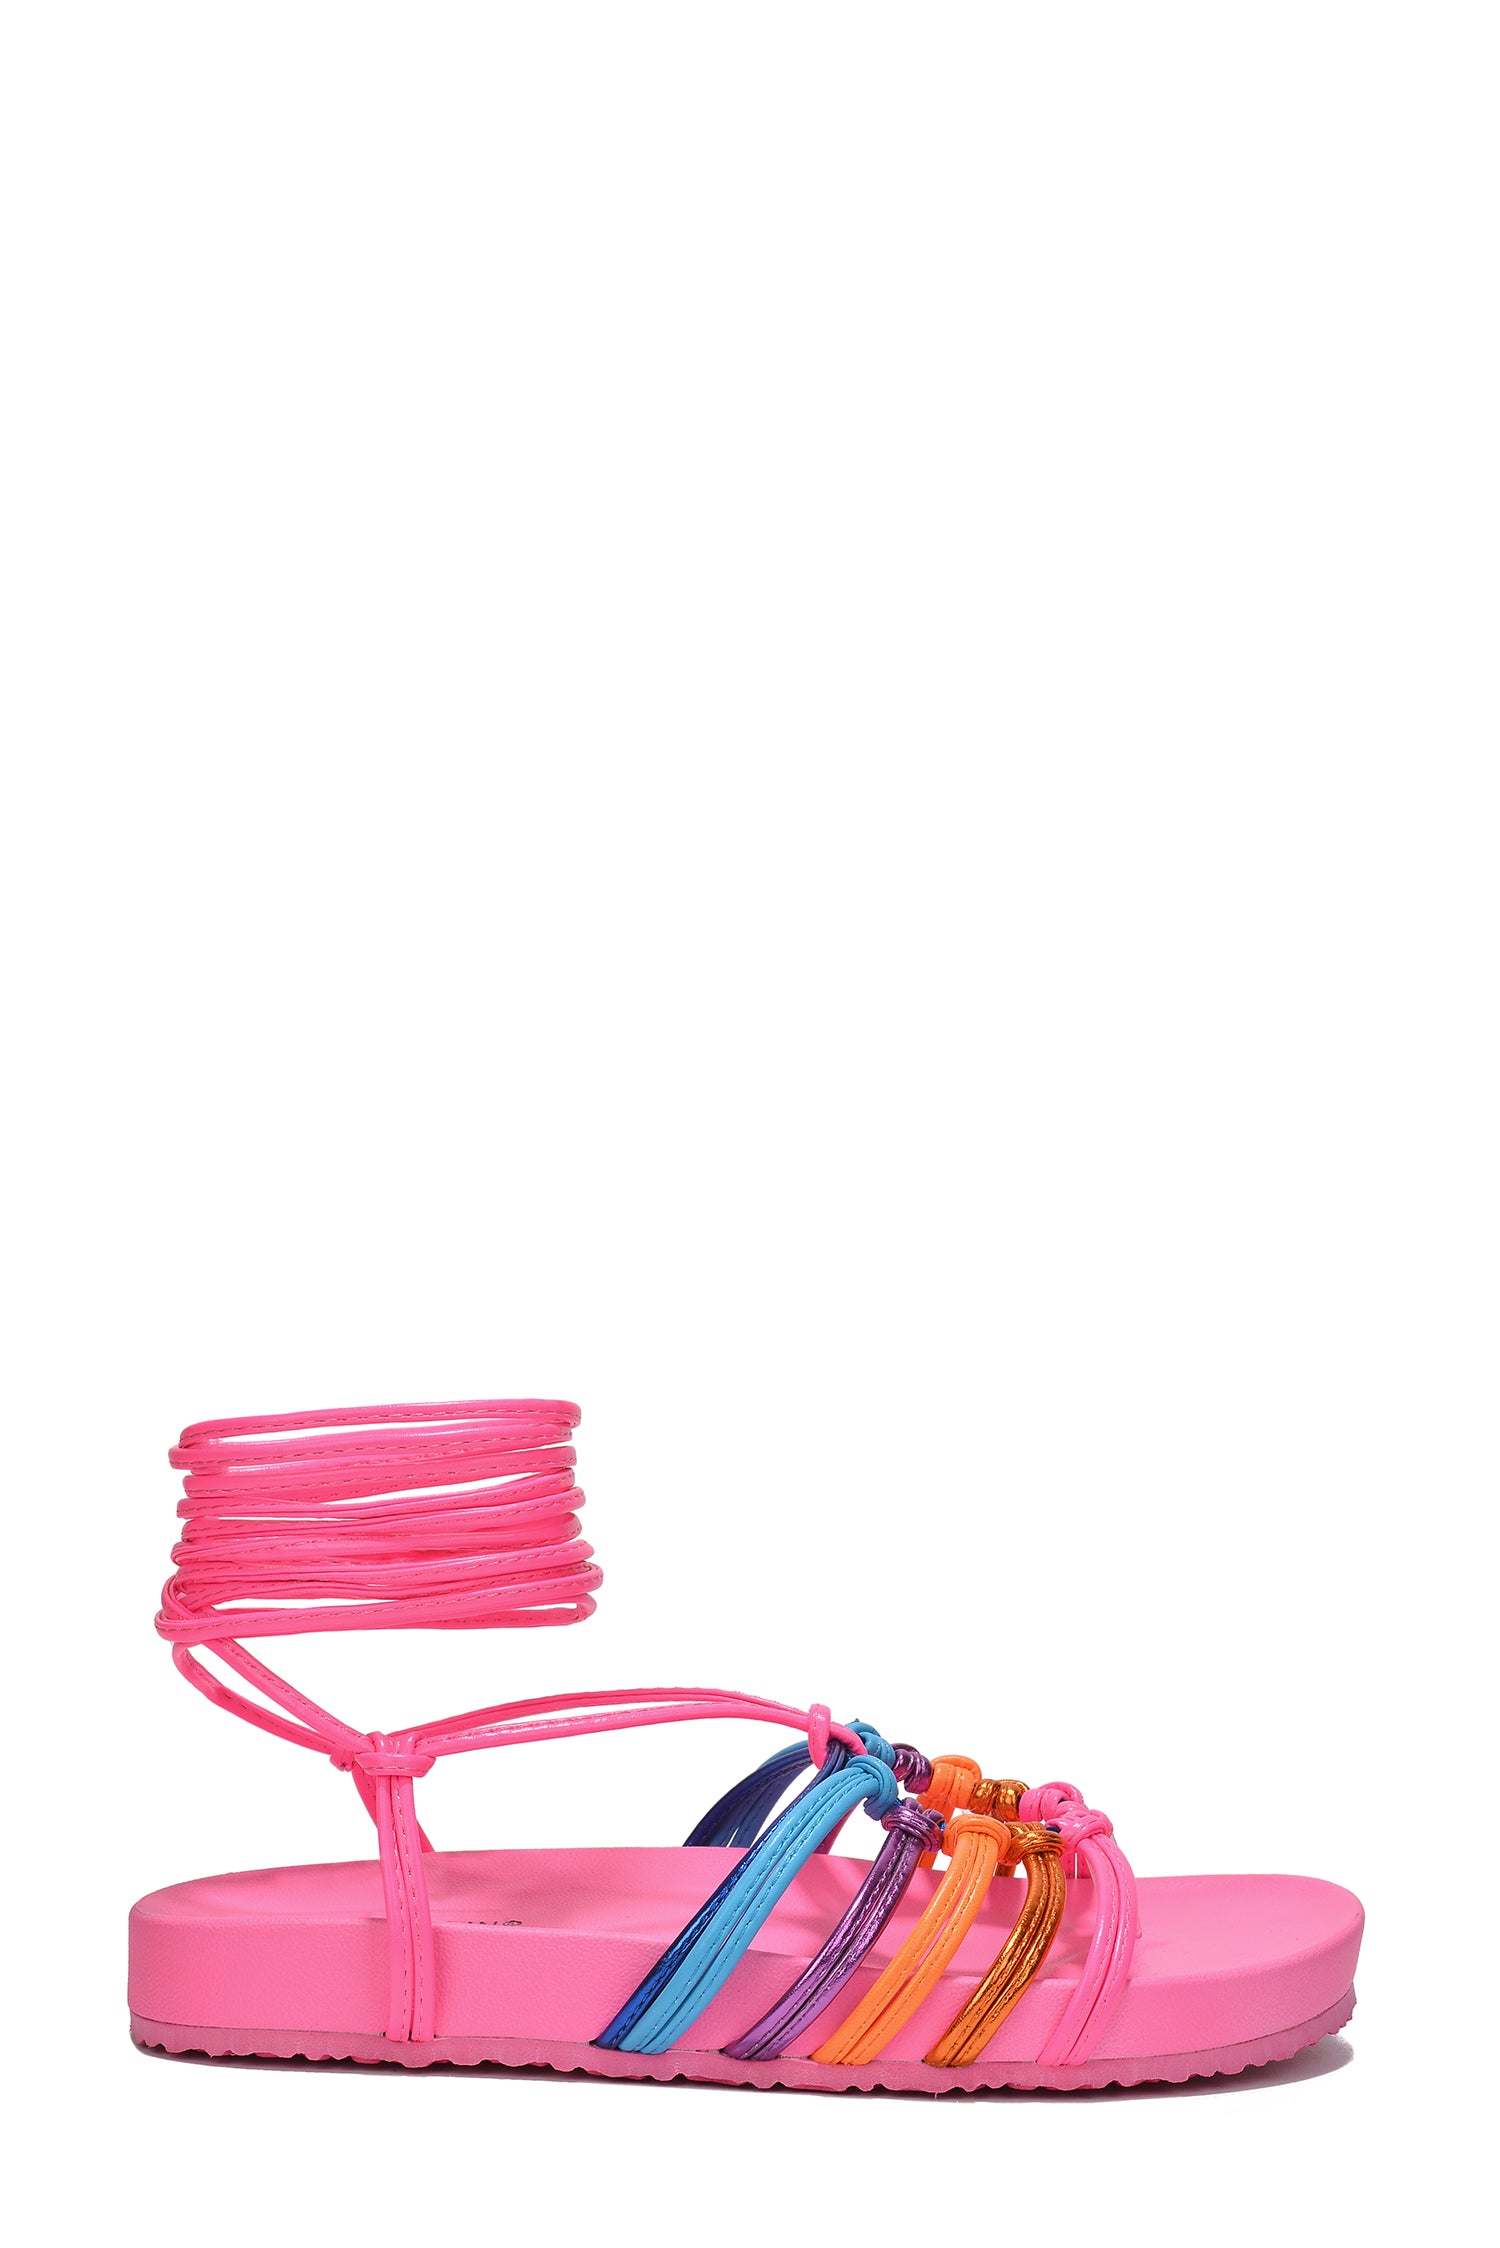 UrbanOG - Morin Strappy Ankle Lace Up Sandals - SANDALS